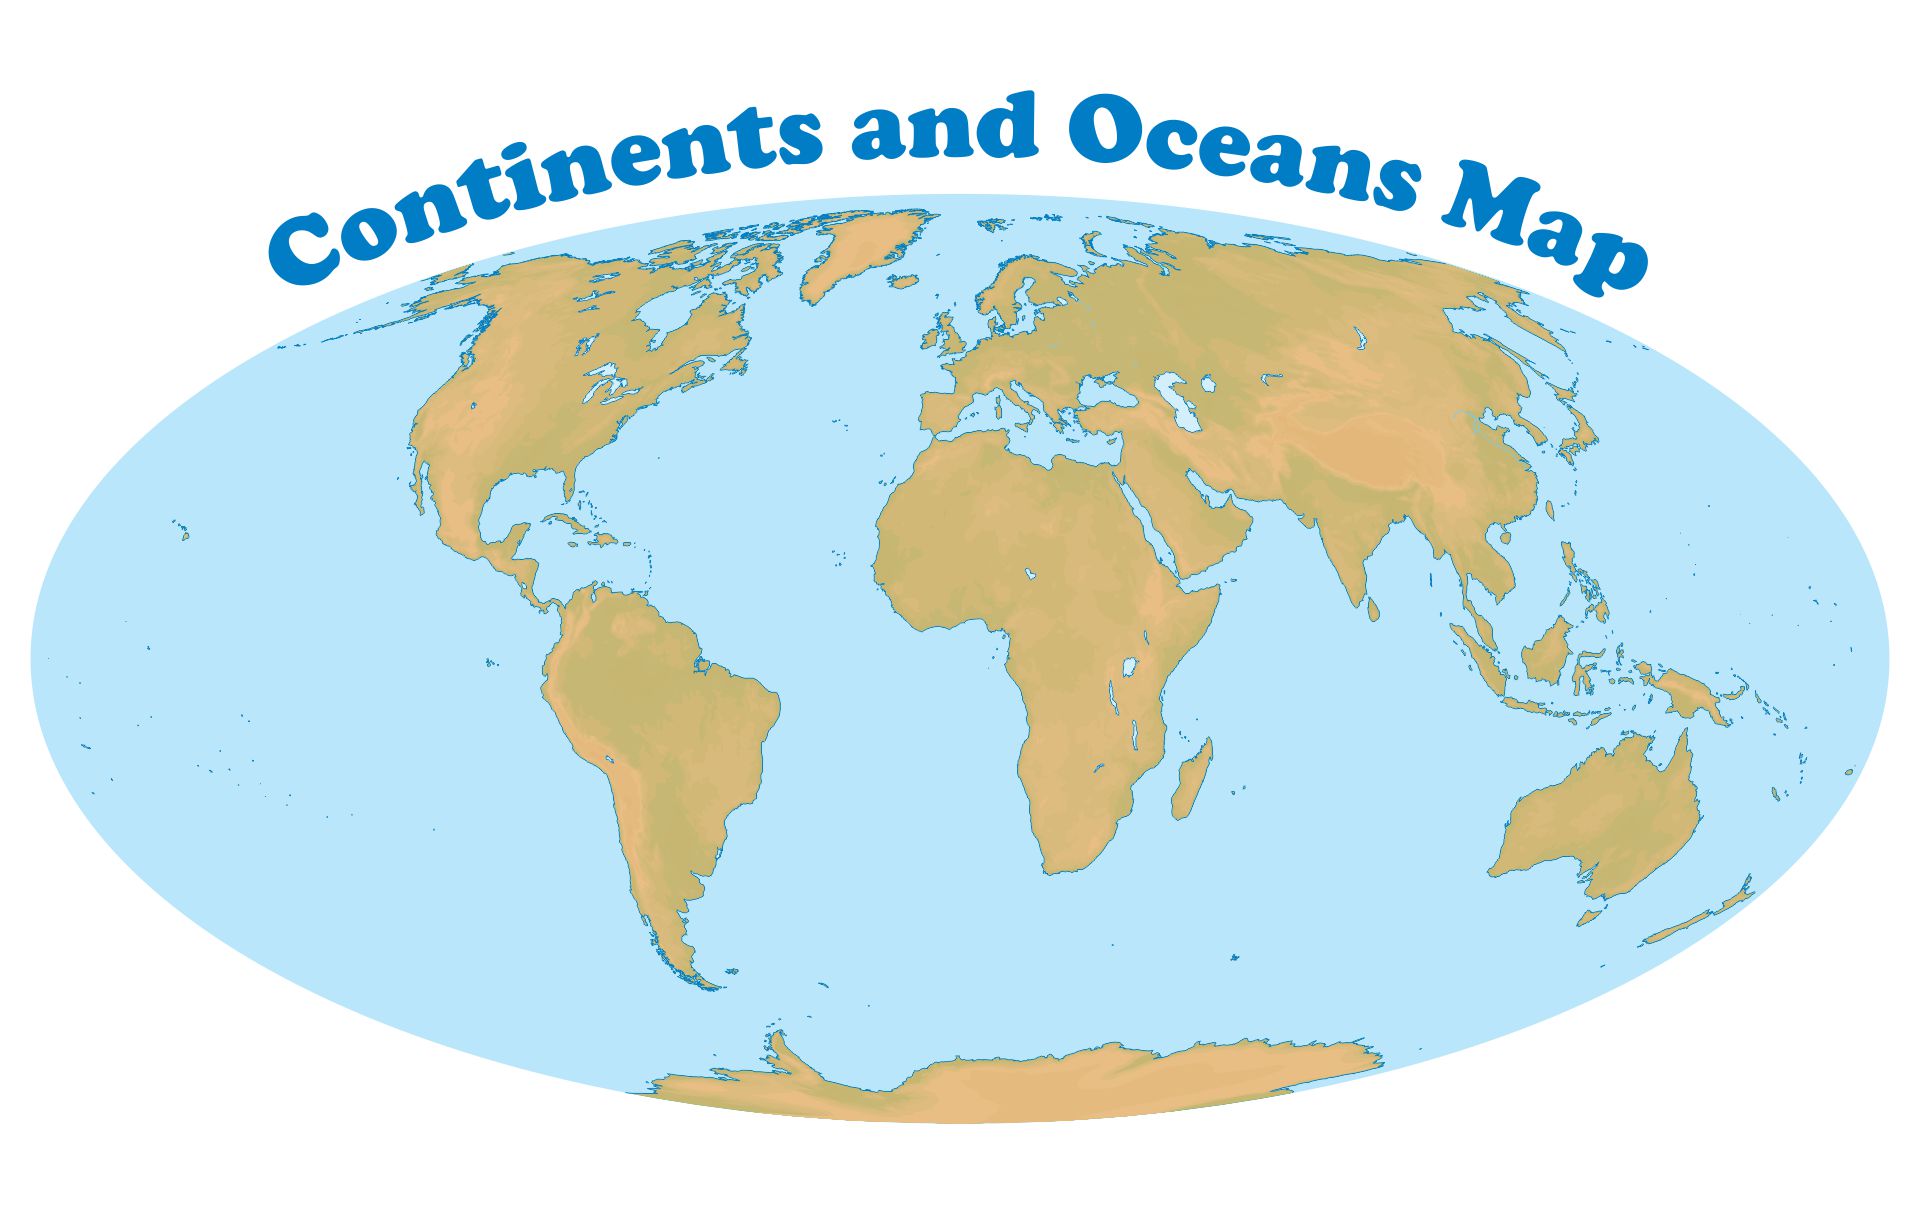 Best Printable Continents And Oceans Map_52158